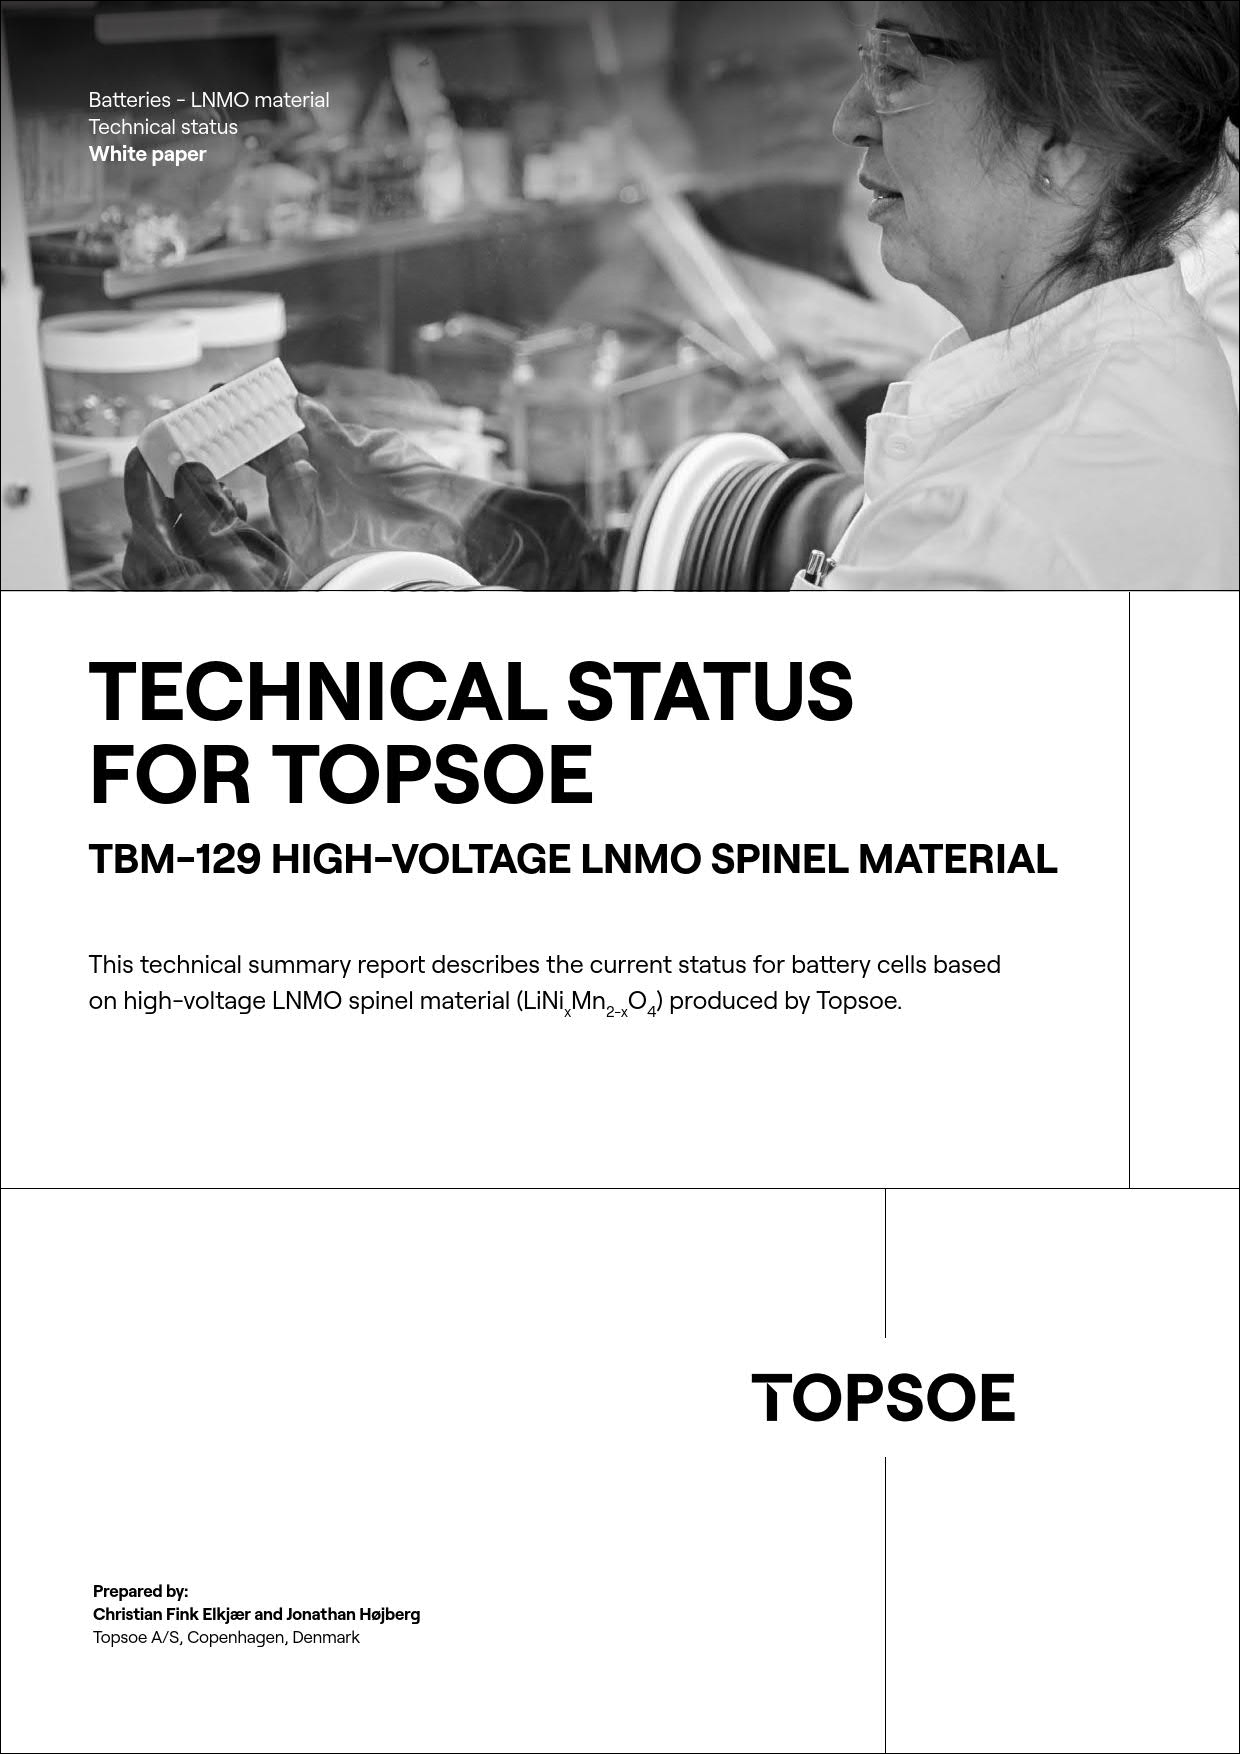 Technical status for LNMO material 